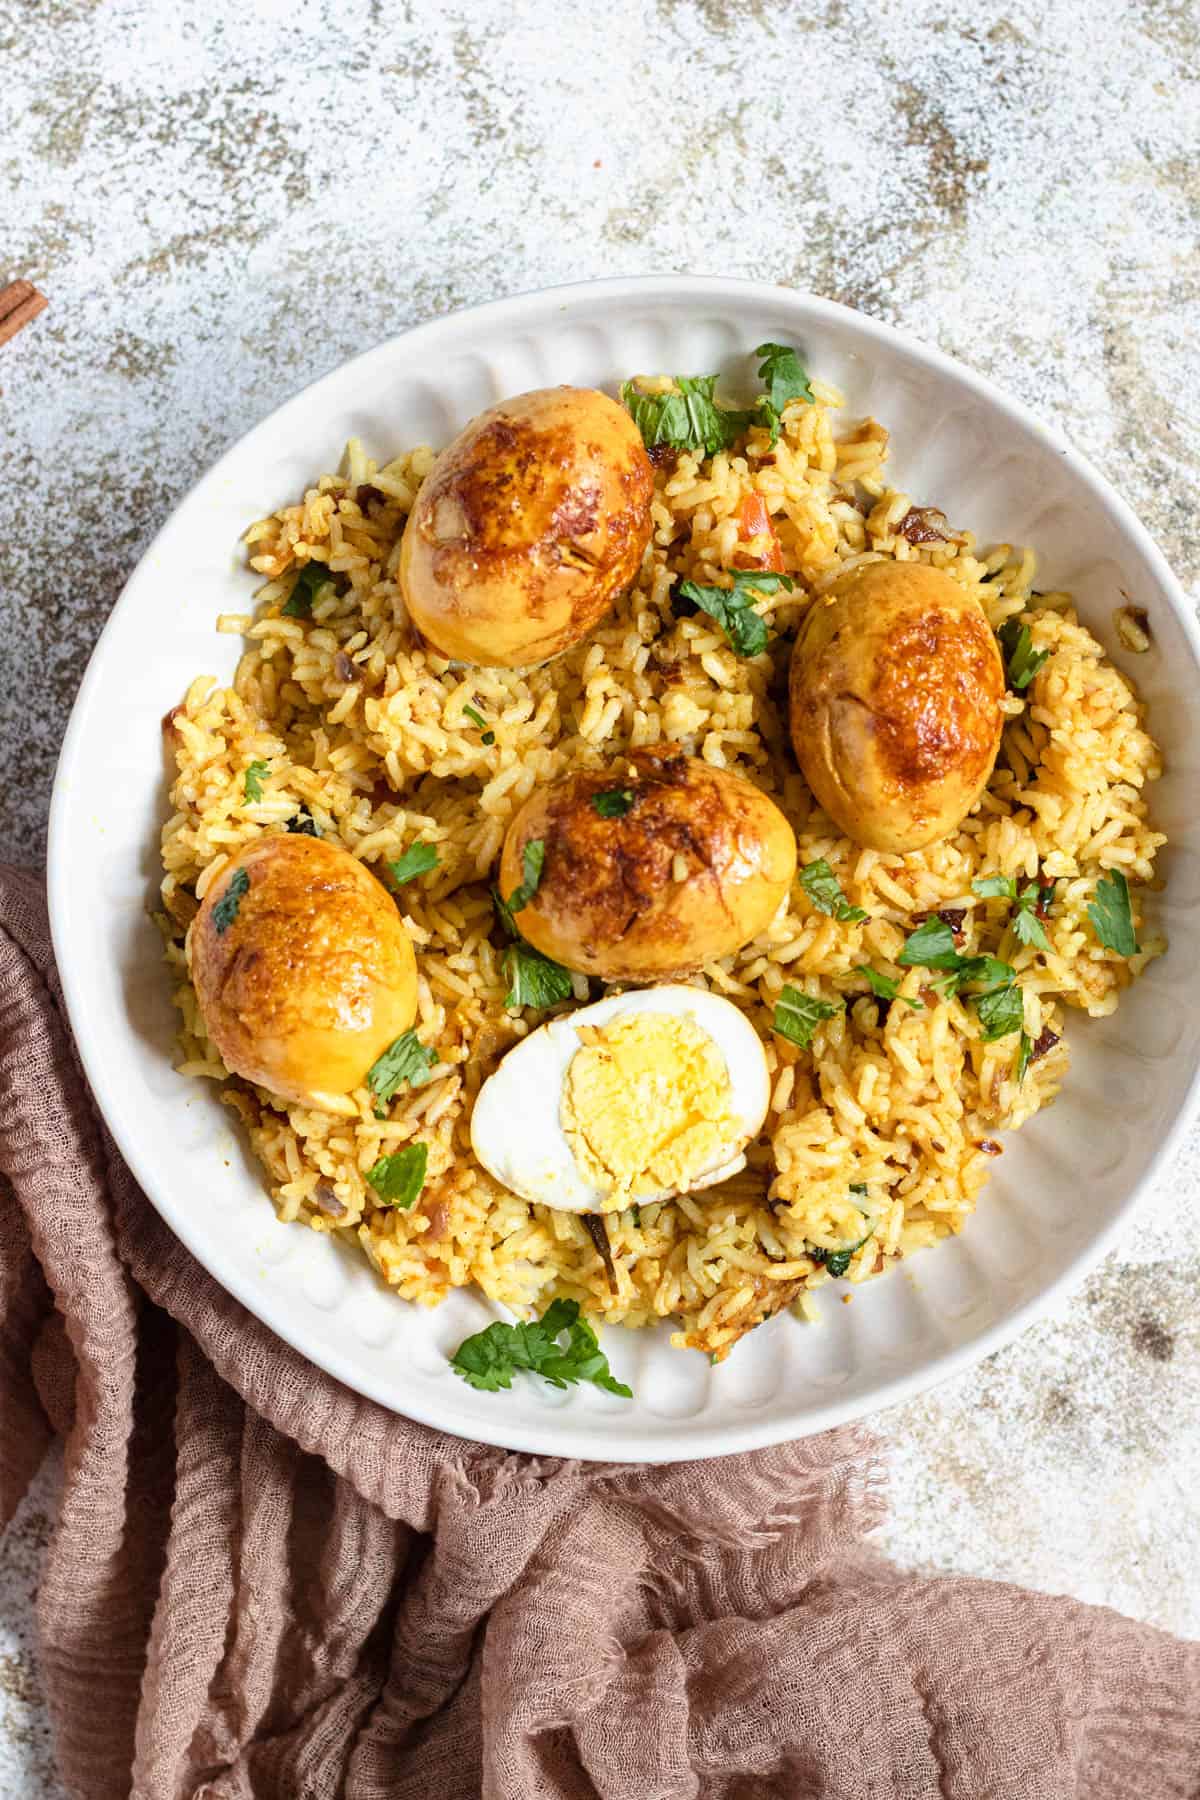 A plate of egg biryani with some whole boiled eggs and some cut in half over the rice. 